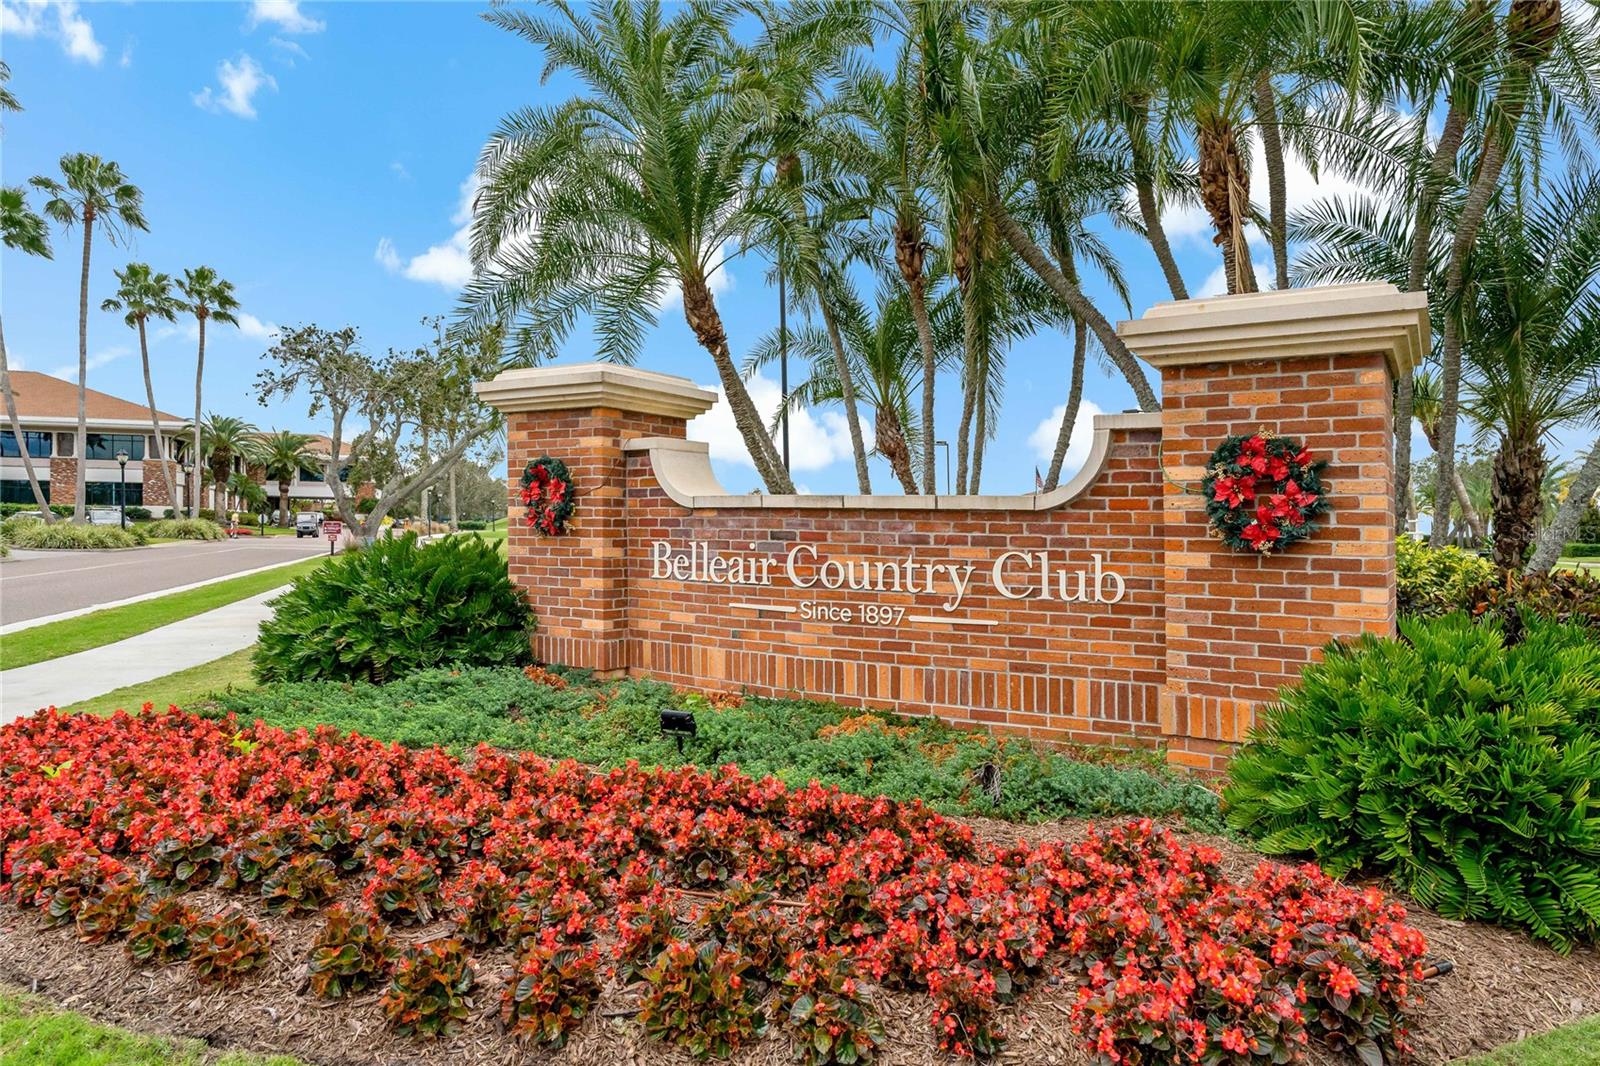 Welcome to Belleair Country Club